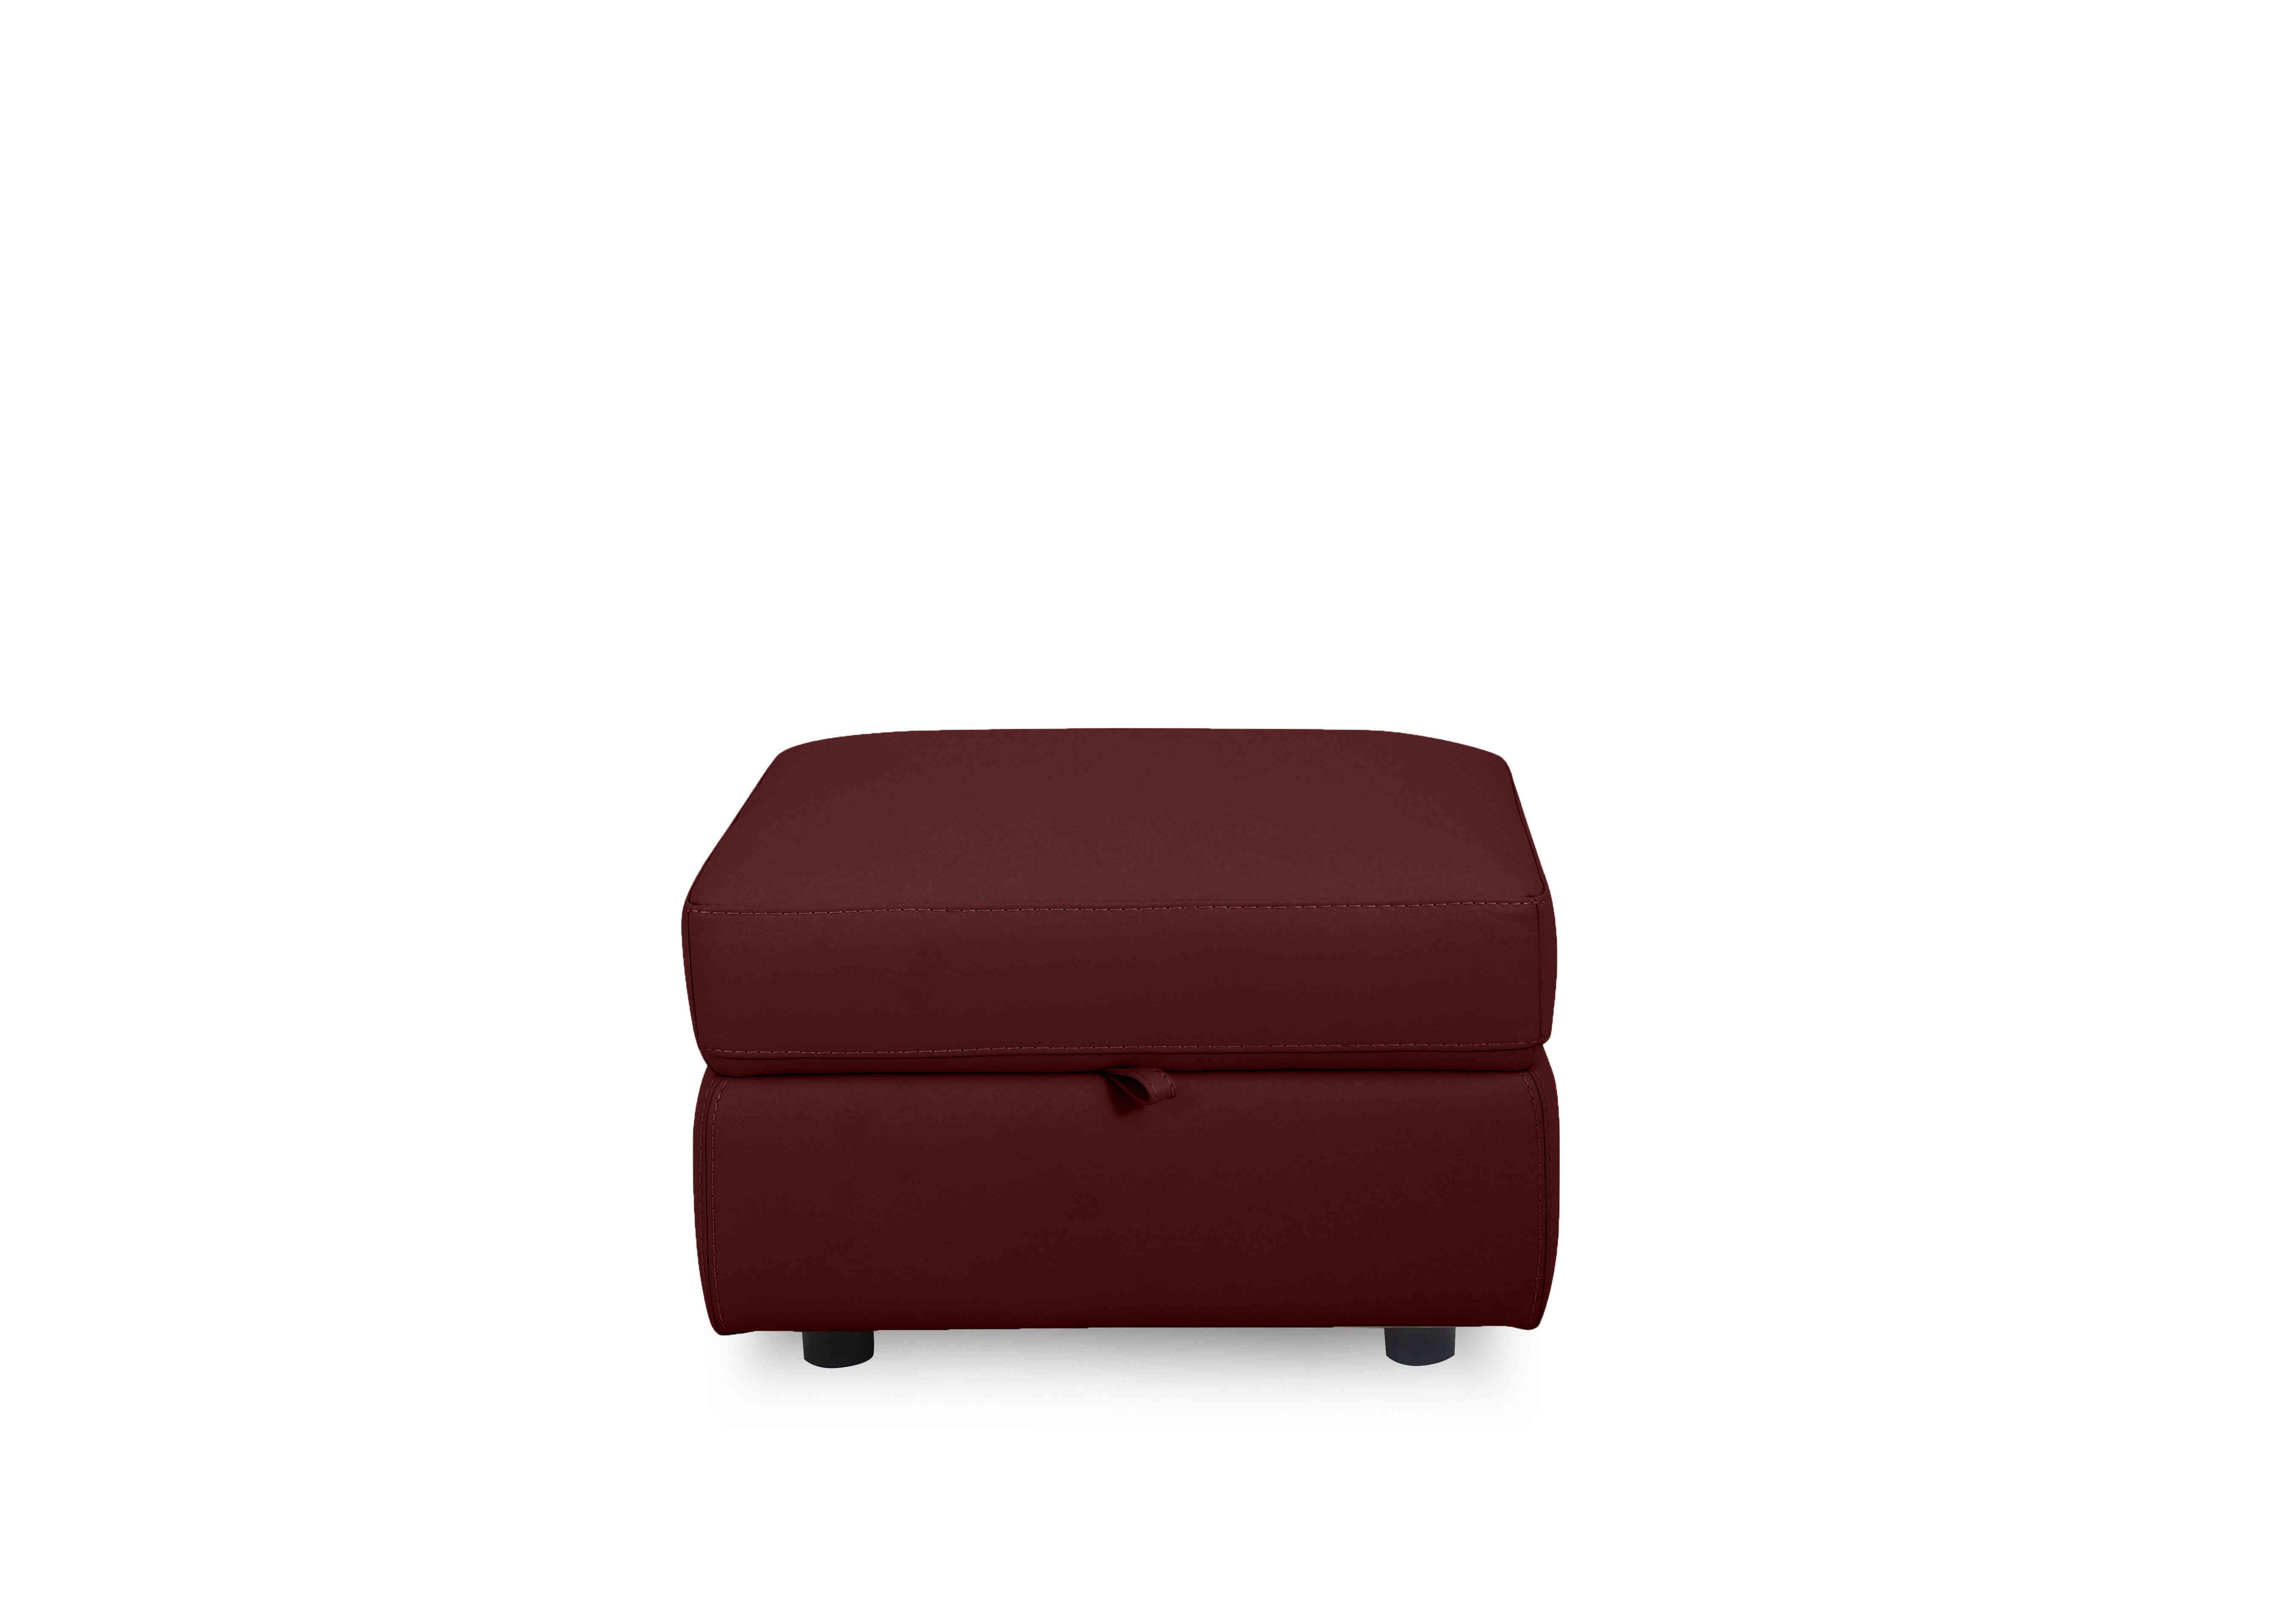 Compact Collection Lille Leather Storage Footstool in Bv-035c Deep Red on Furniture Village